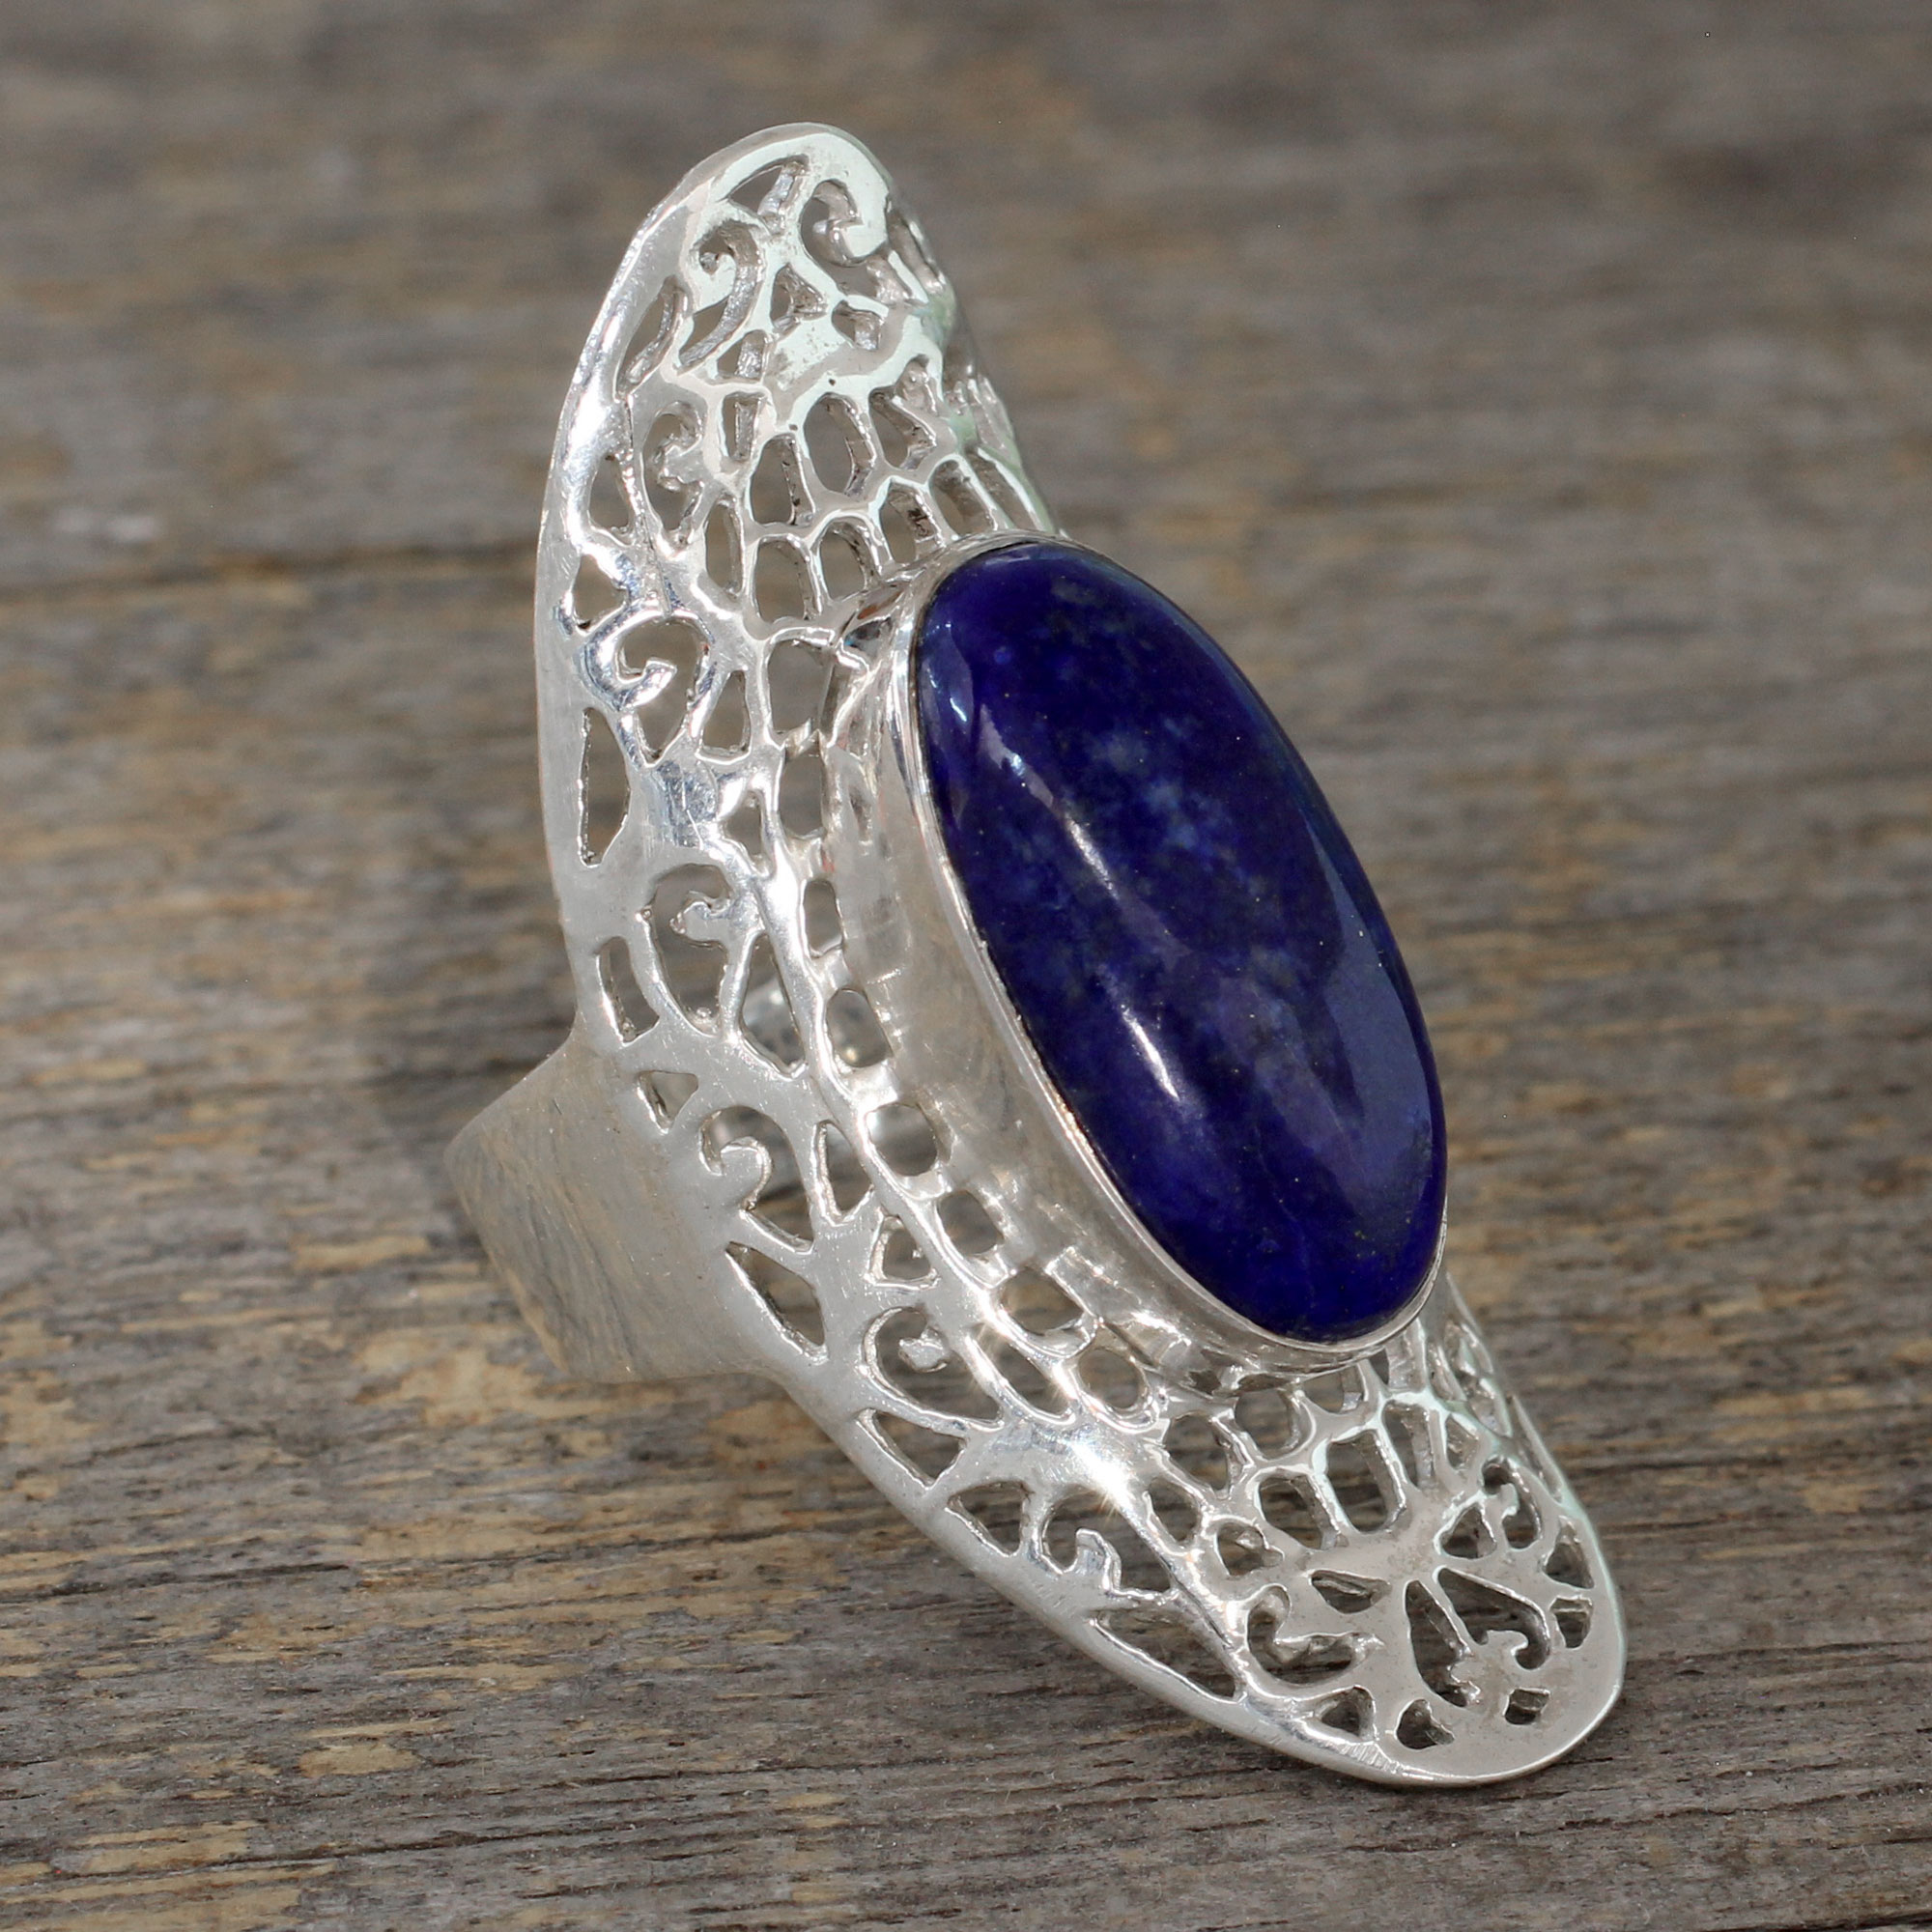 Dramatic Sterling Silver Cocktail Ring with Lapis Lazuli, 'Halo of Lace'